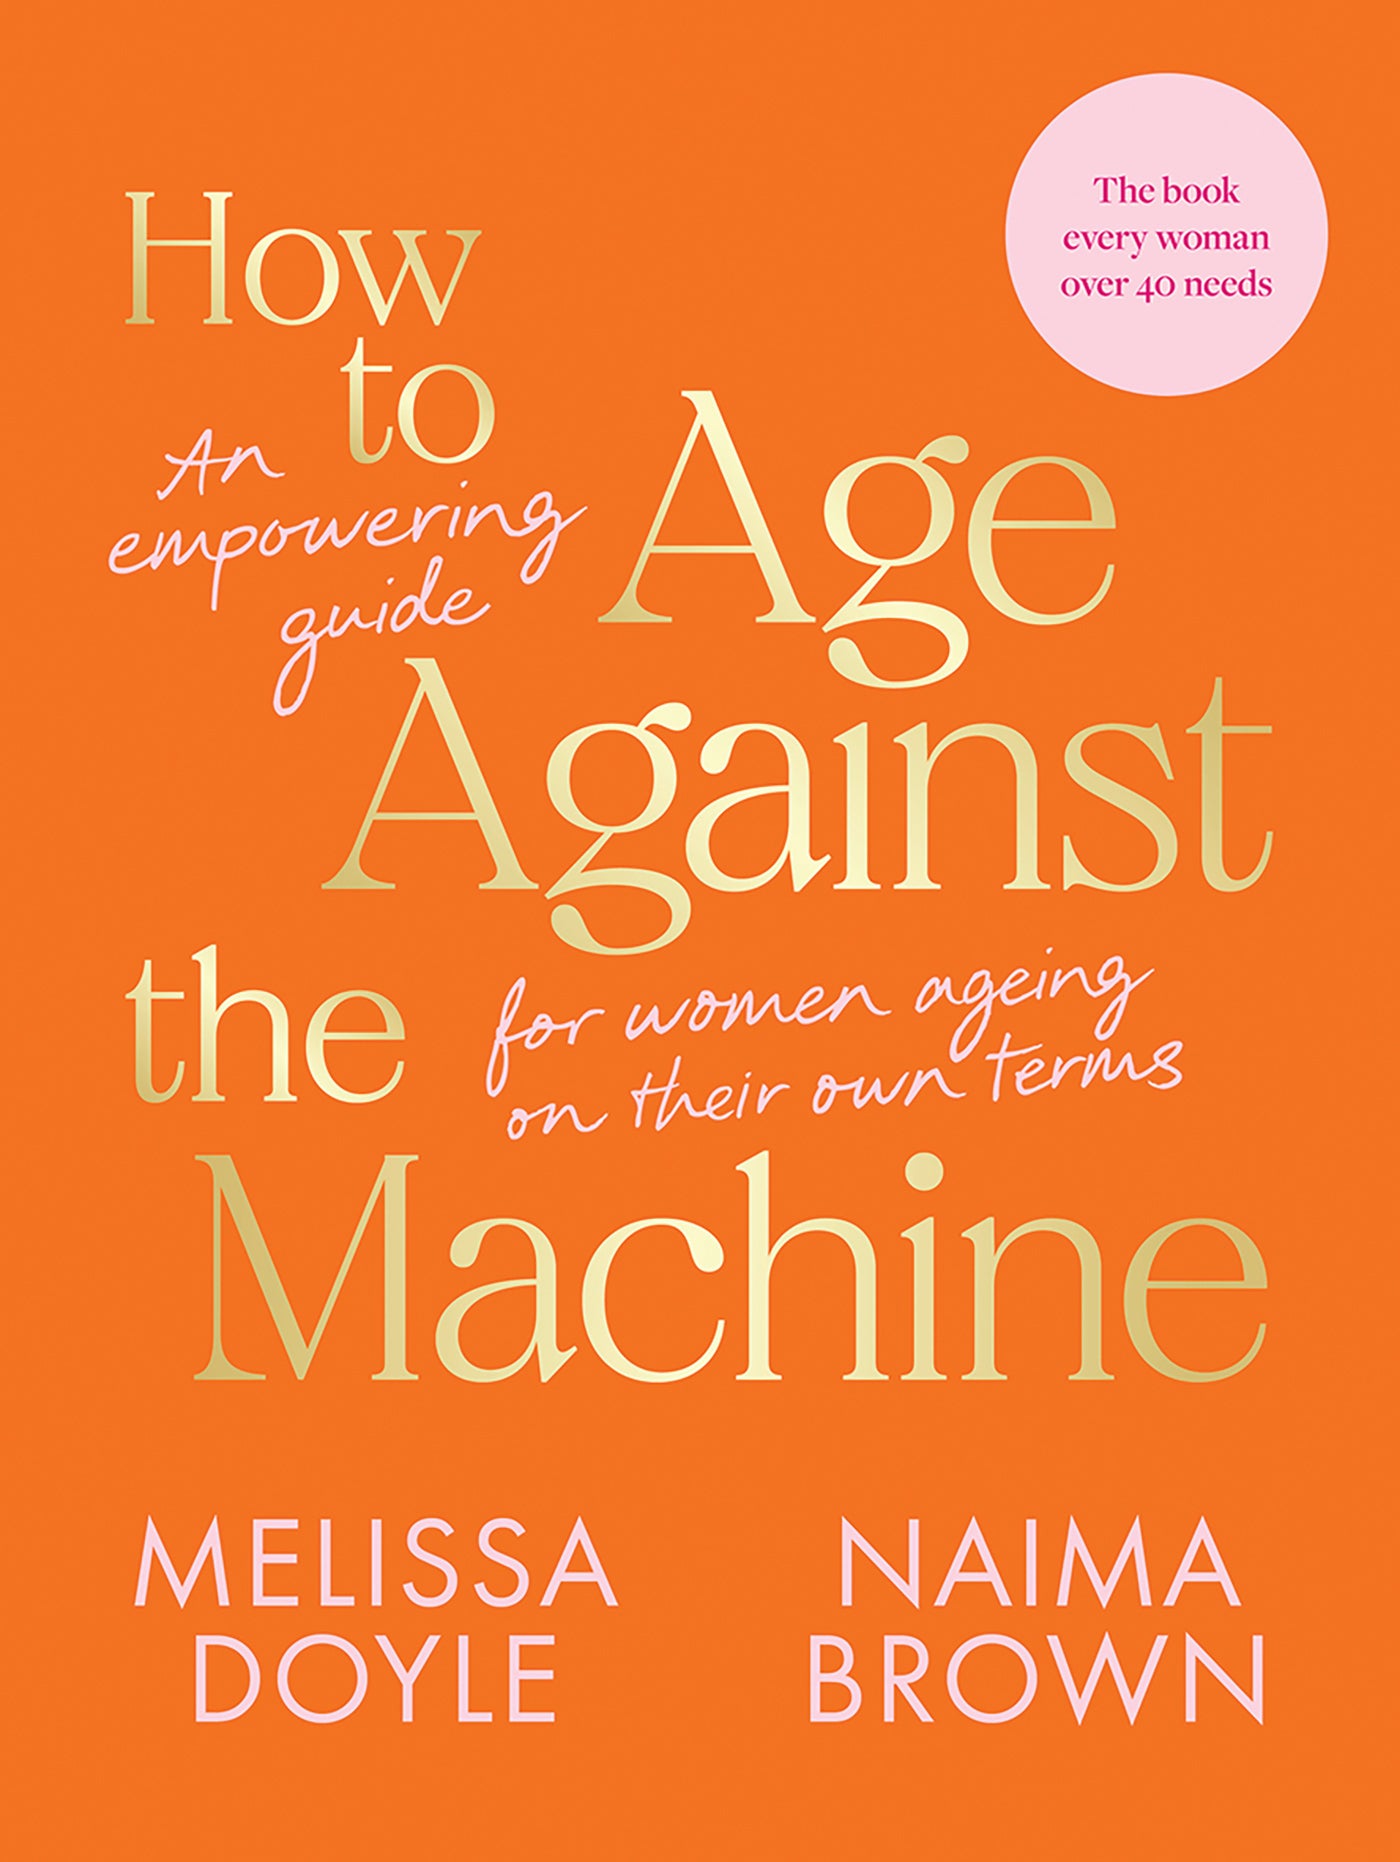 How to Age Against the Machine